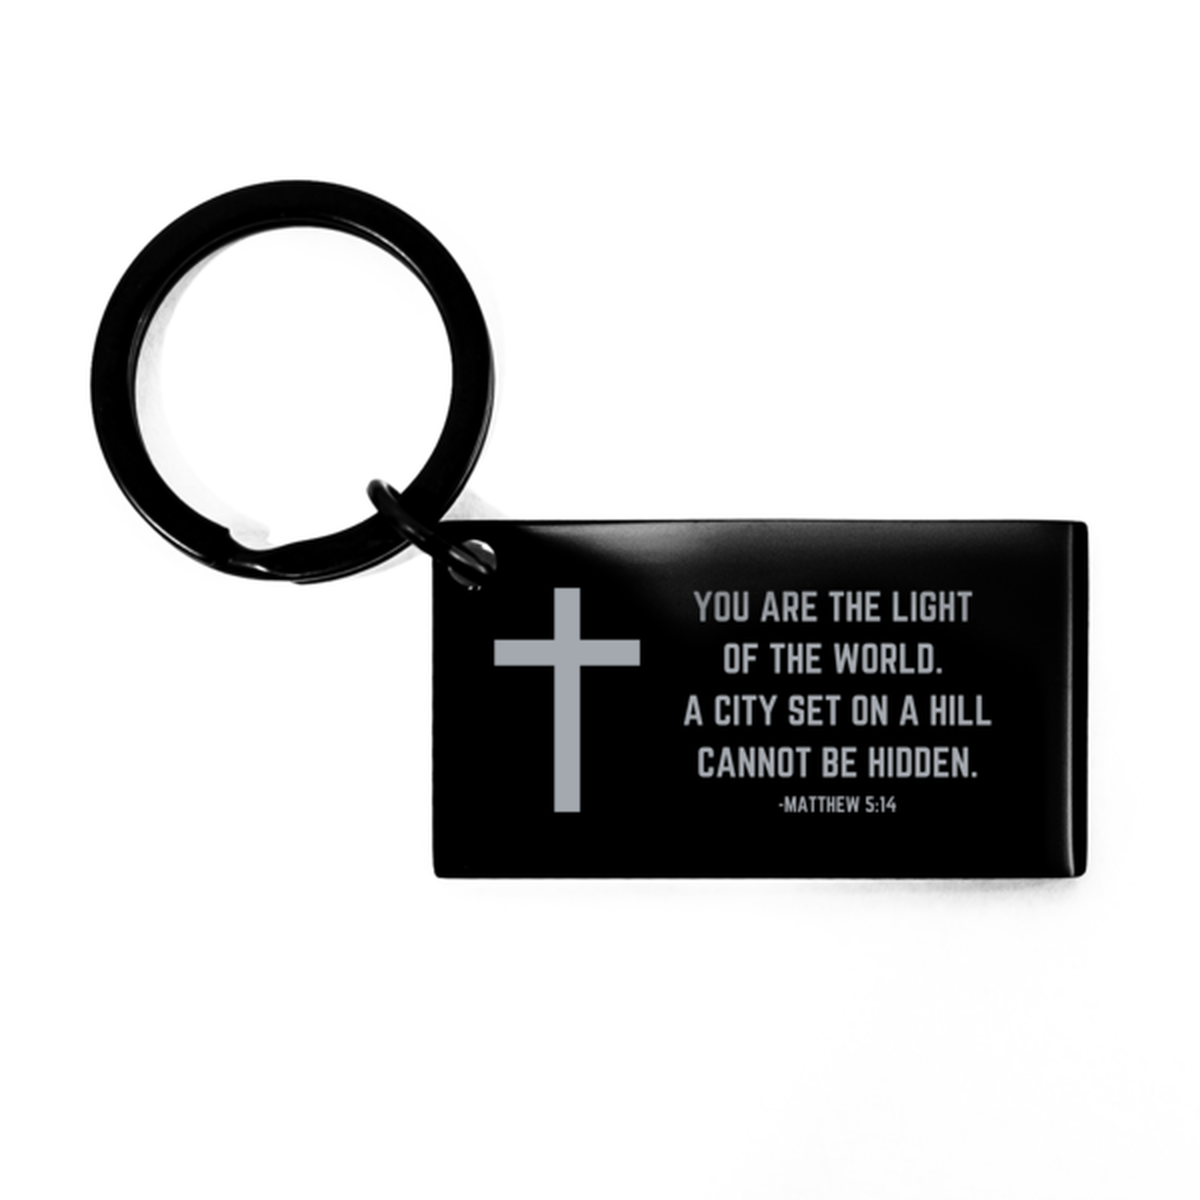 Baptism Gifts For Teenage Boys Girls, Christian Bible Verse Black Keychain, You are the light of the world, Confirmation Gifts, Bible Verse Keyring for Son, Godson, Grandson, Nephew